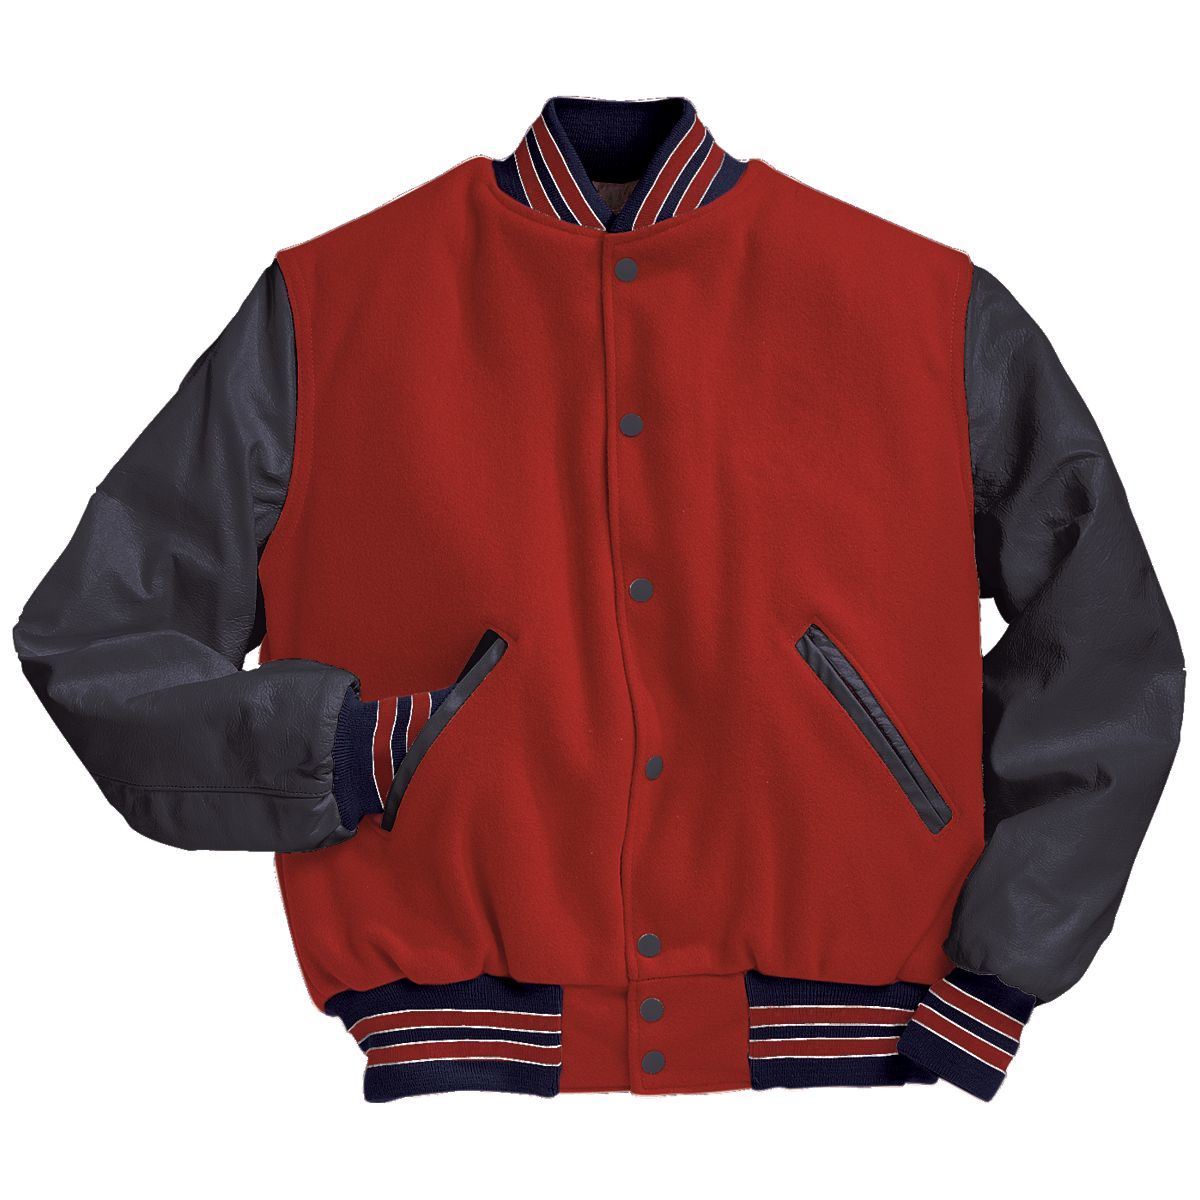 click to view Scarlet/True Navy/White